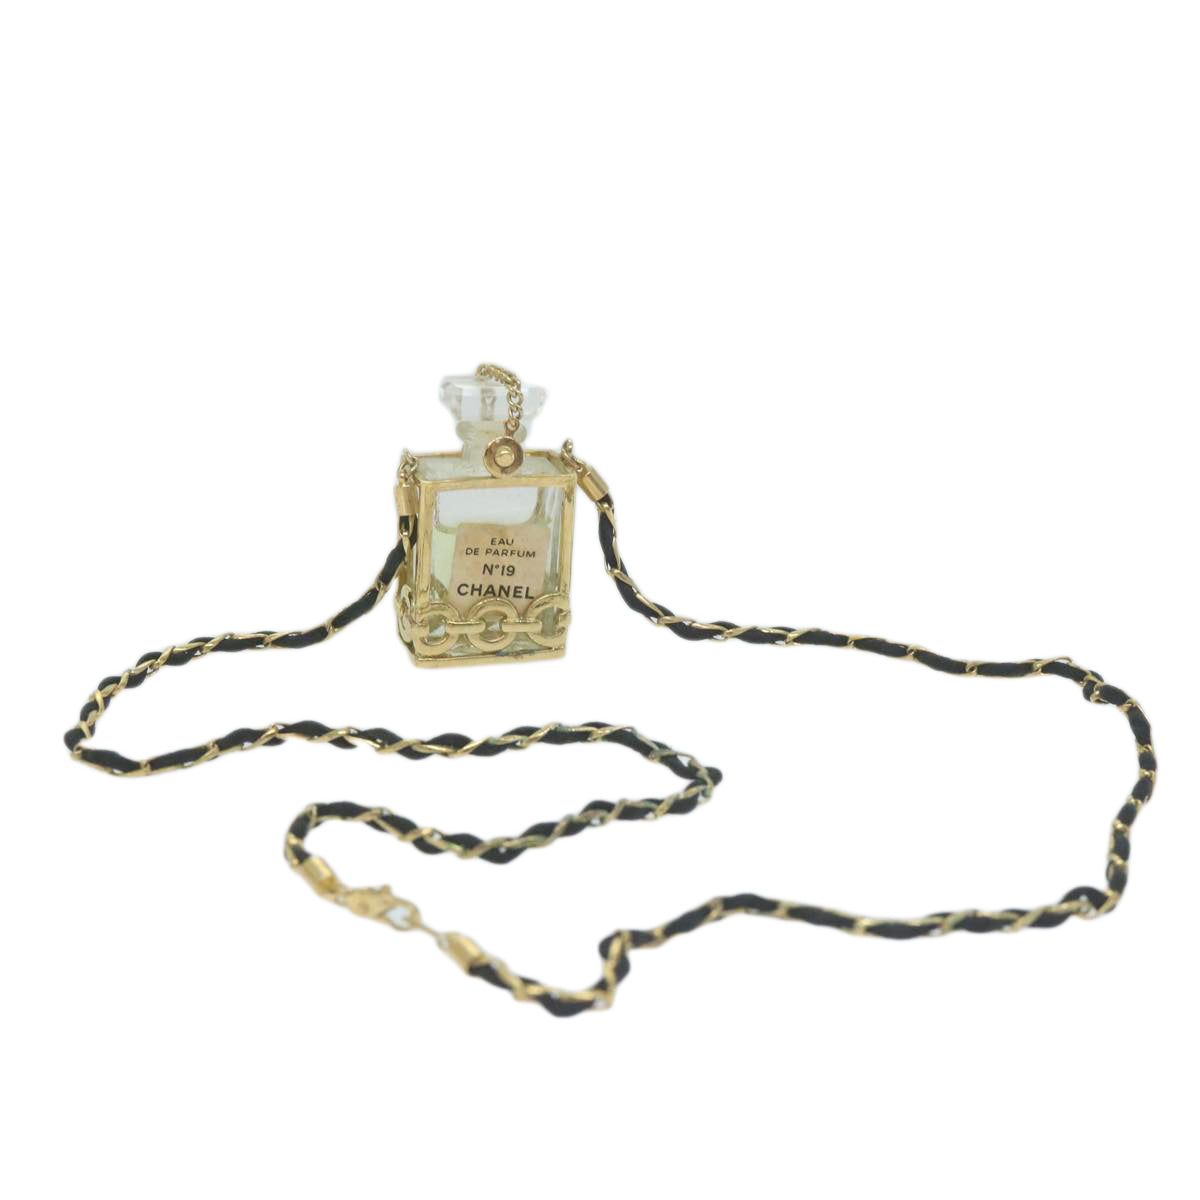 CHANEL Perfume N.19 Necklace Gold Tone CC Auth bs11755